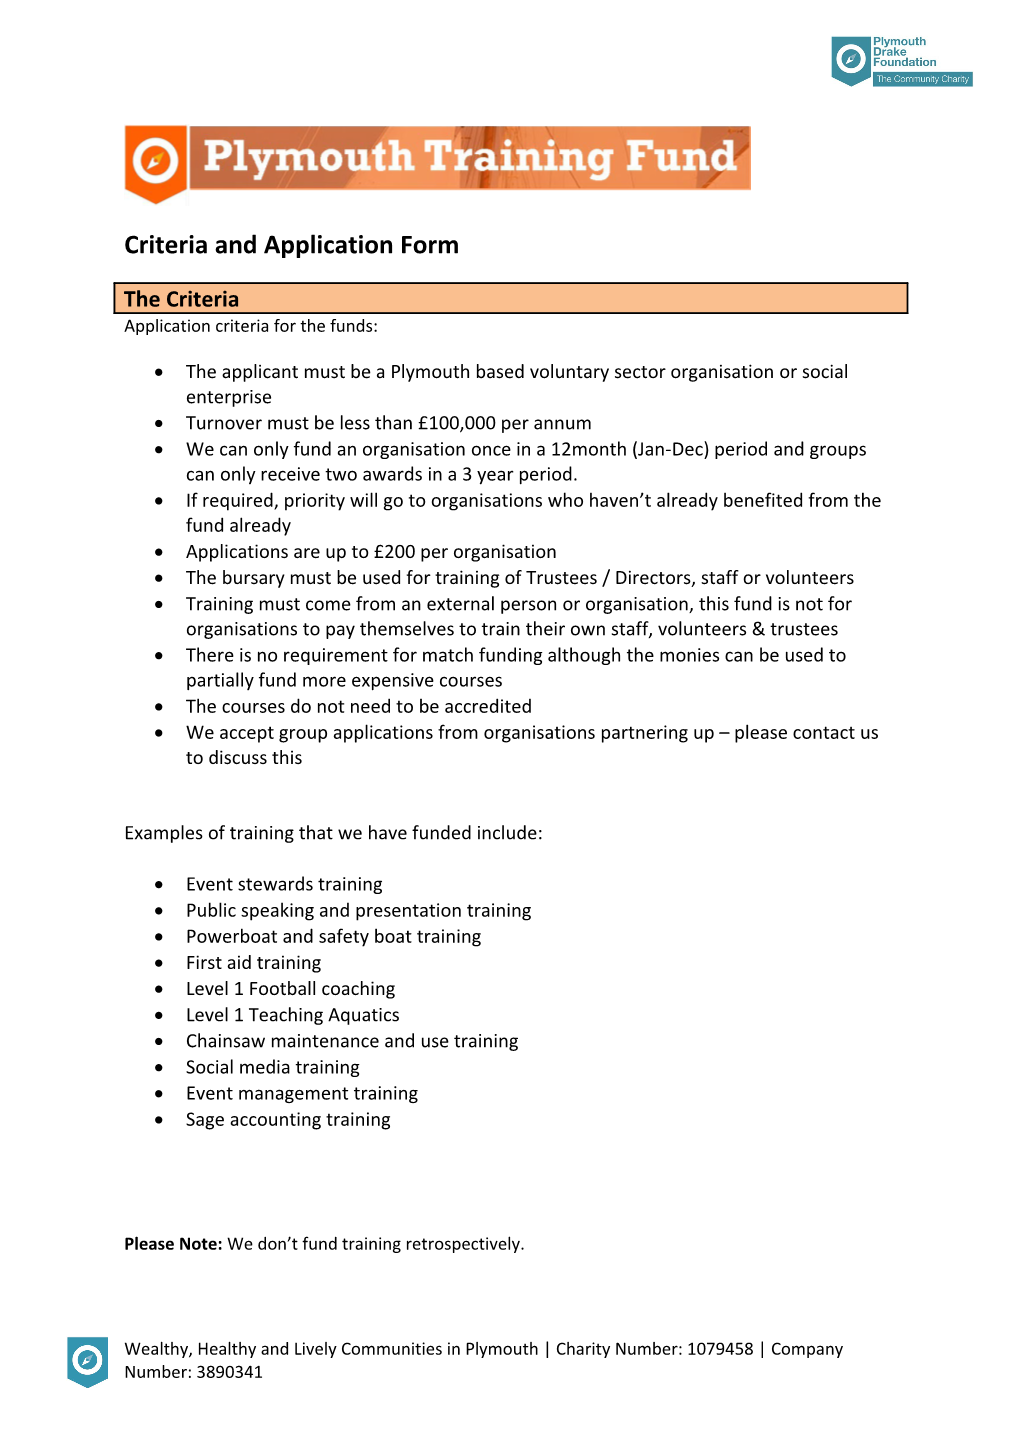 Criteria and Application Form